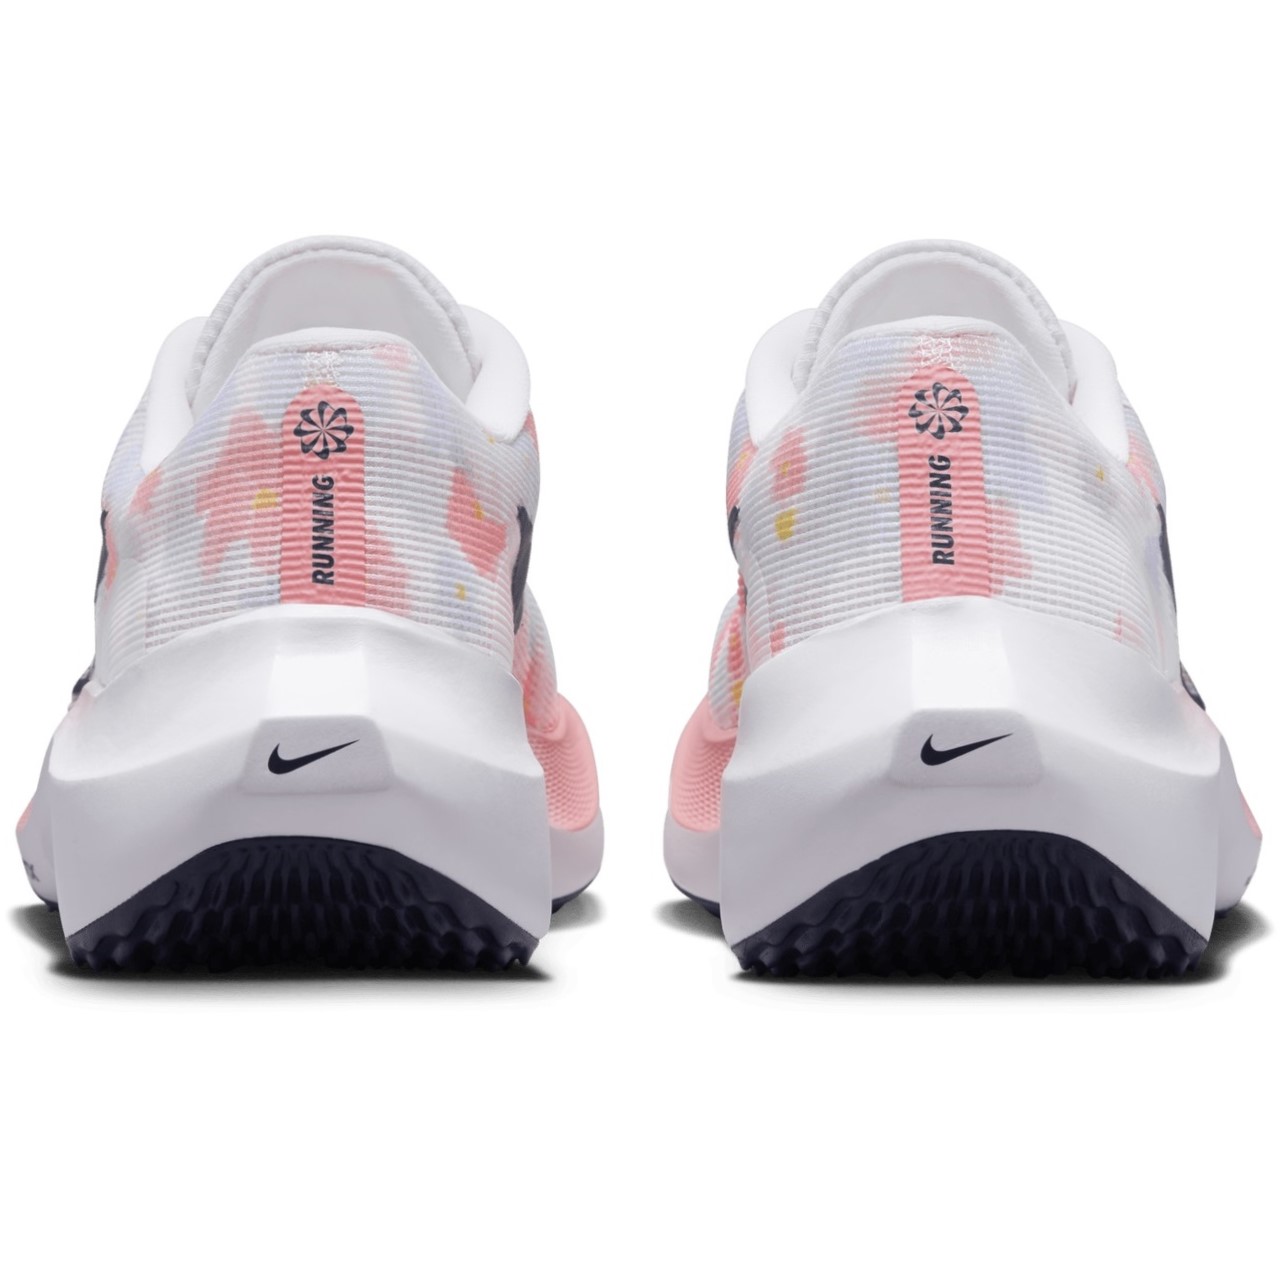 GIÀY NIKE NỮ ZOOM FLY 5 PREMIUM WOMEN ROAD RUNNING SHOES PEARL PINK DV7894-600 3